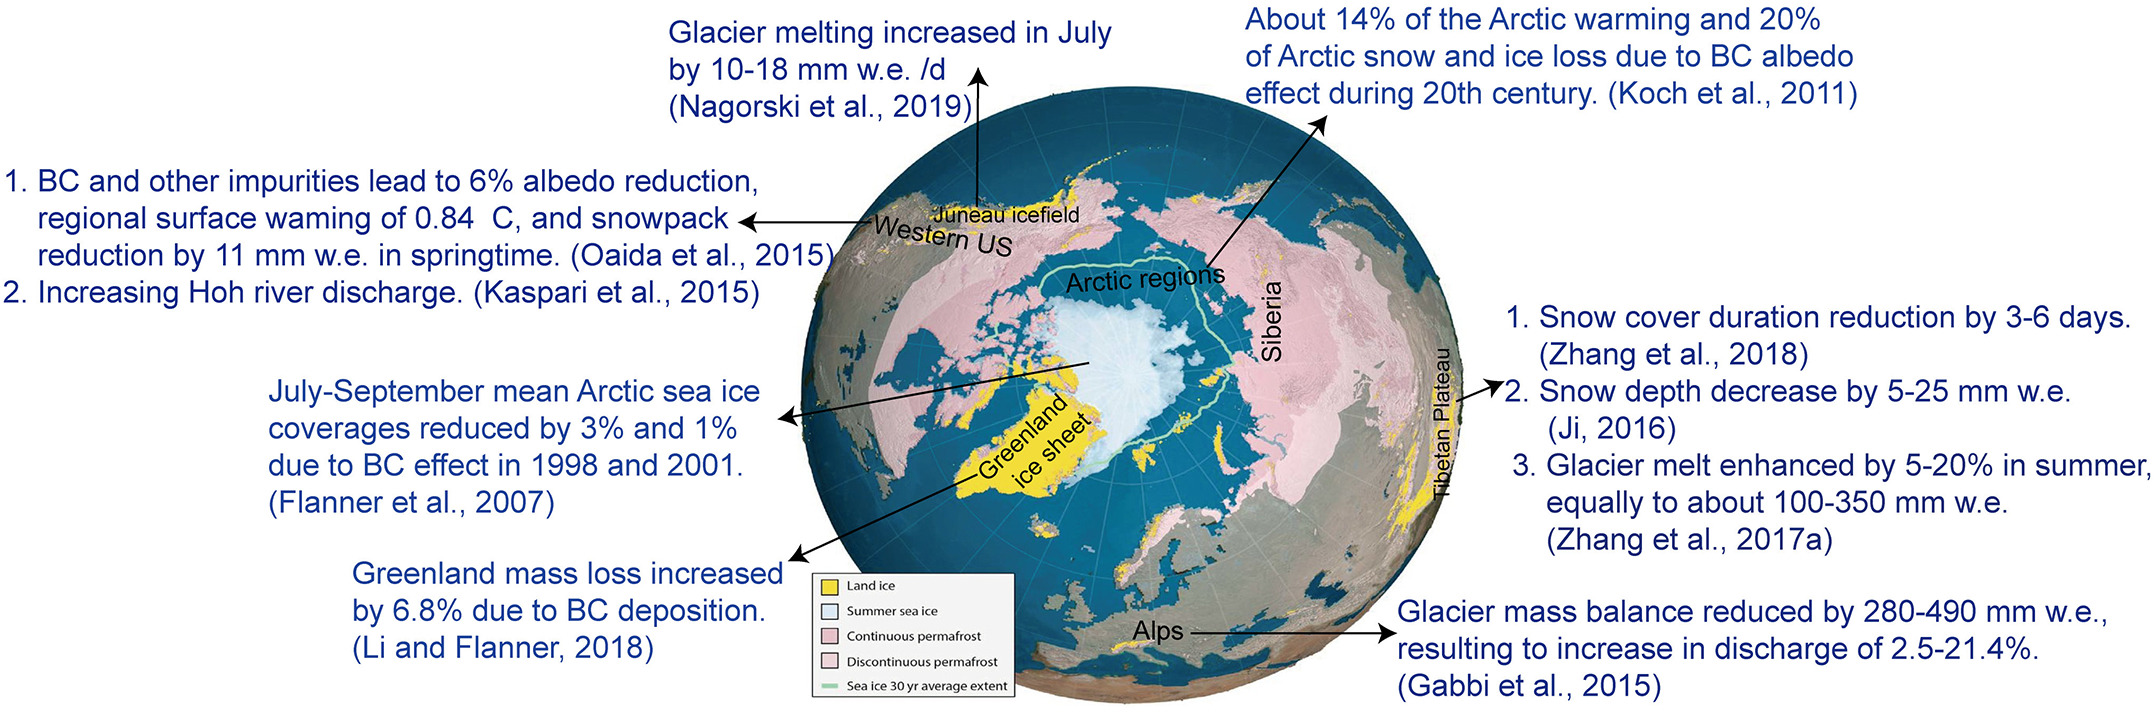 Brief summary of the potential effects of BC in snow/ice in different cryospheric regions